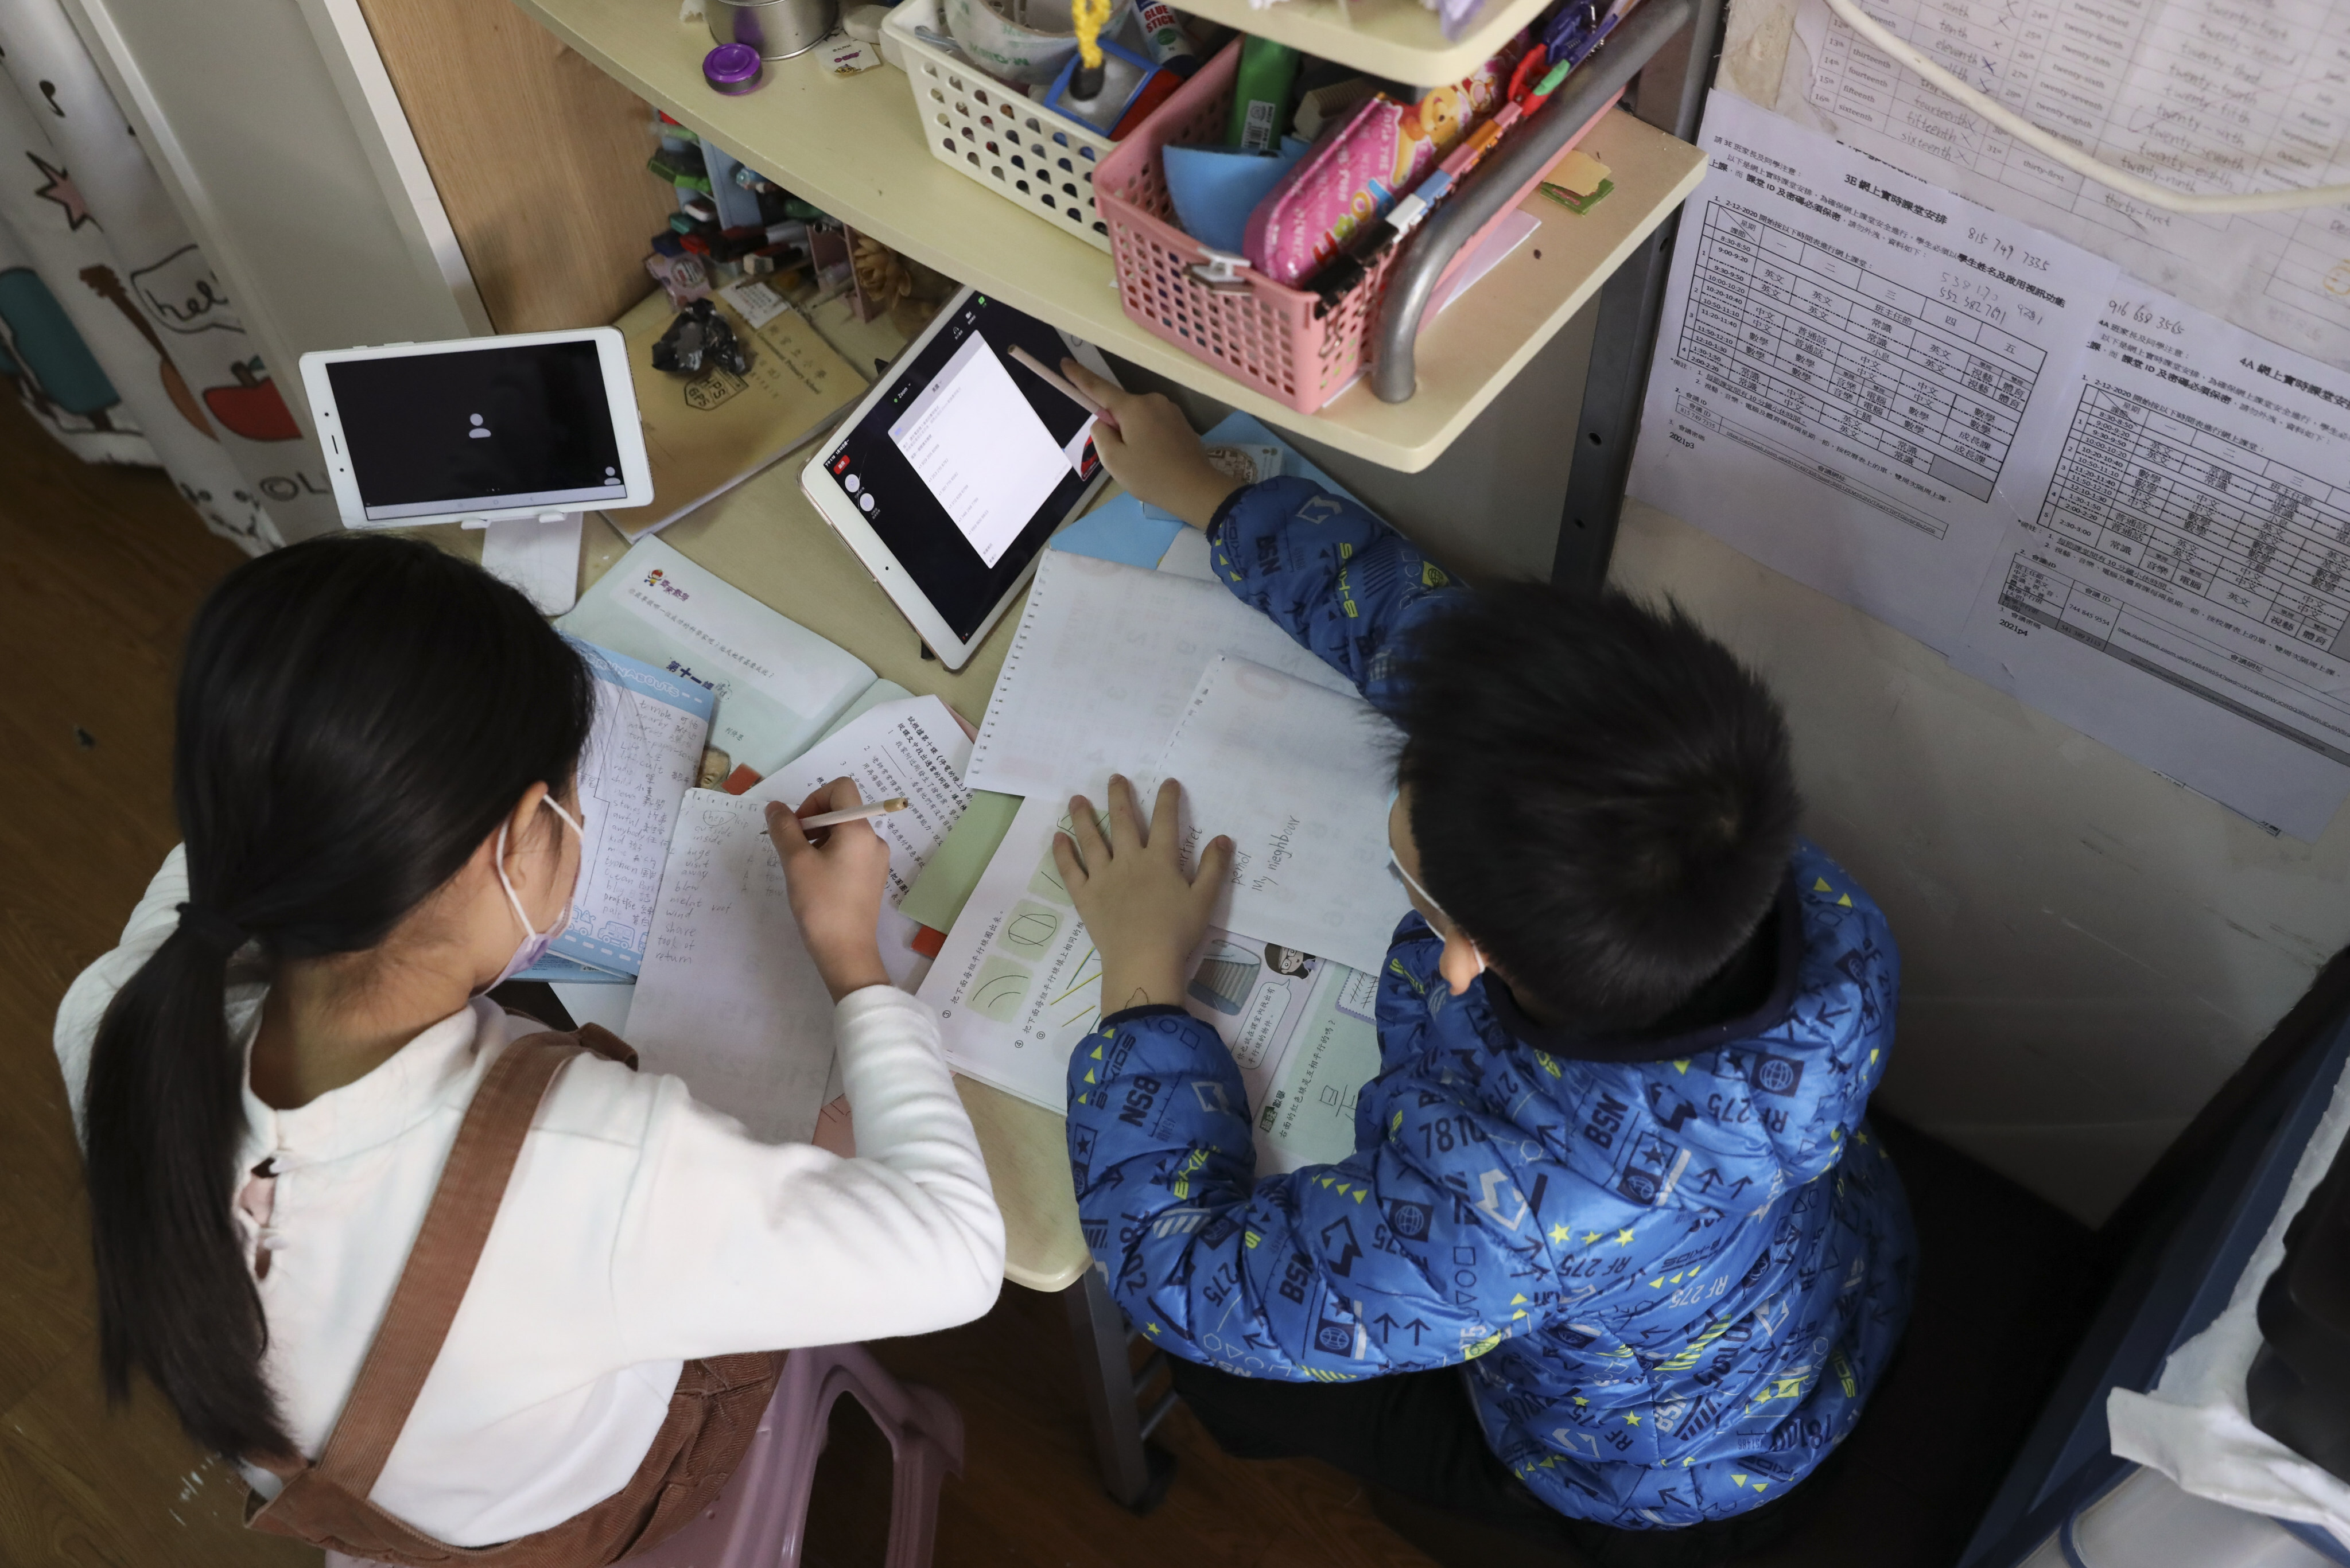 Ben and May, from a low-income family, study via online class at home in Tsuen Wan.Photo: K. Y. Cheng